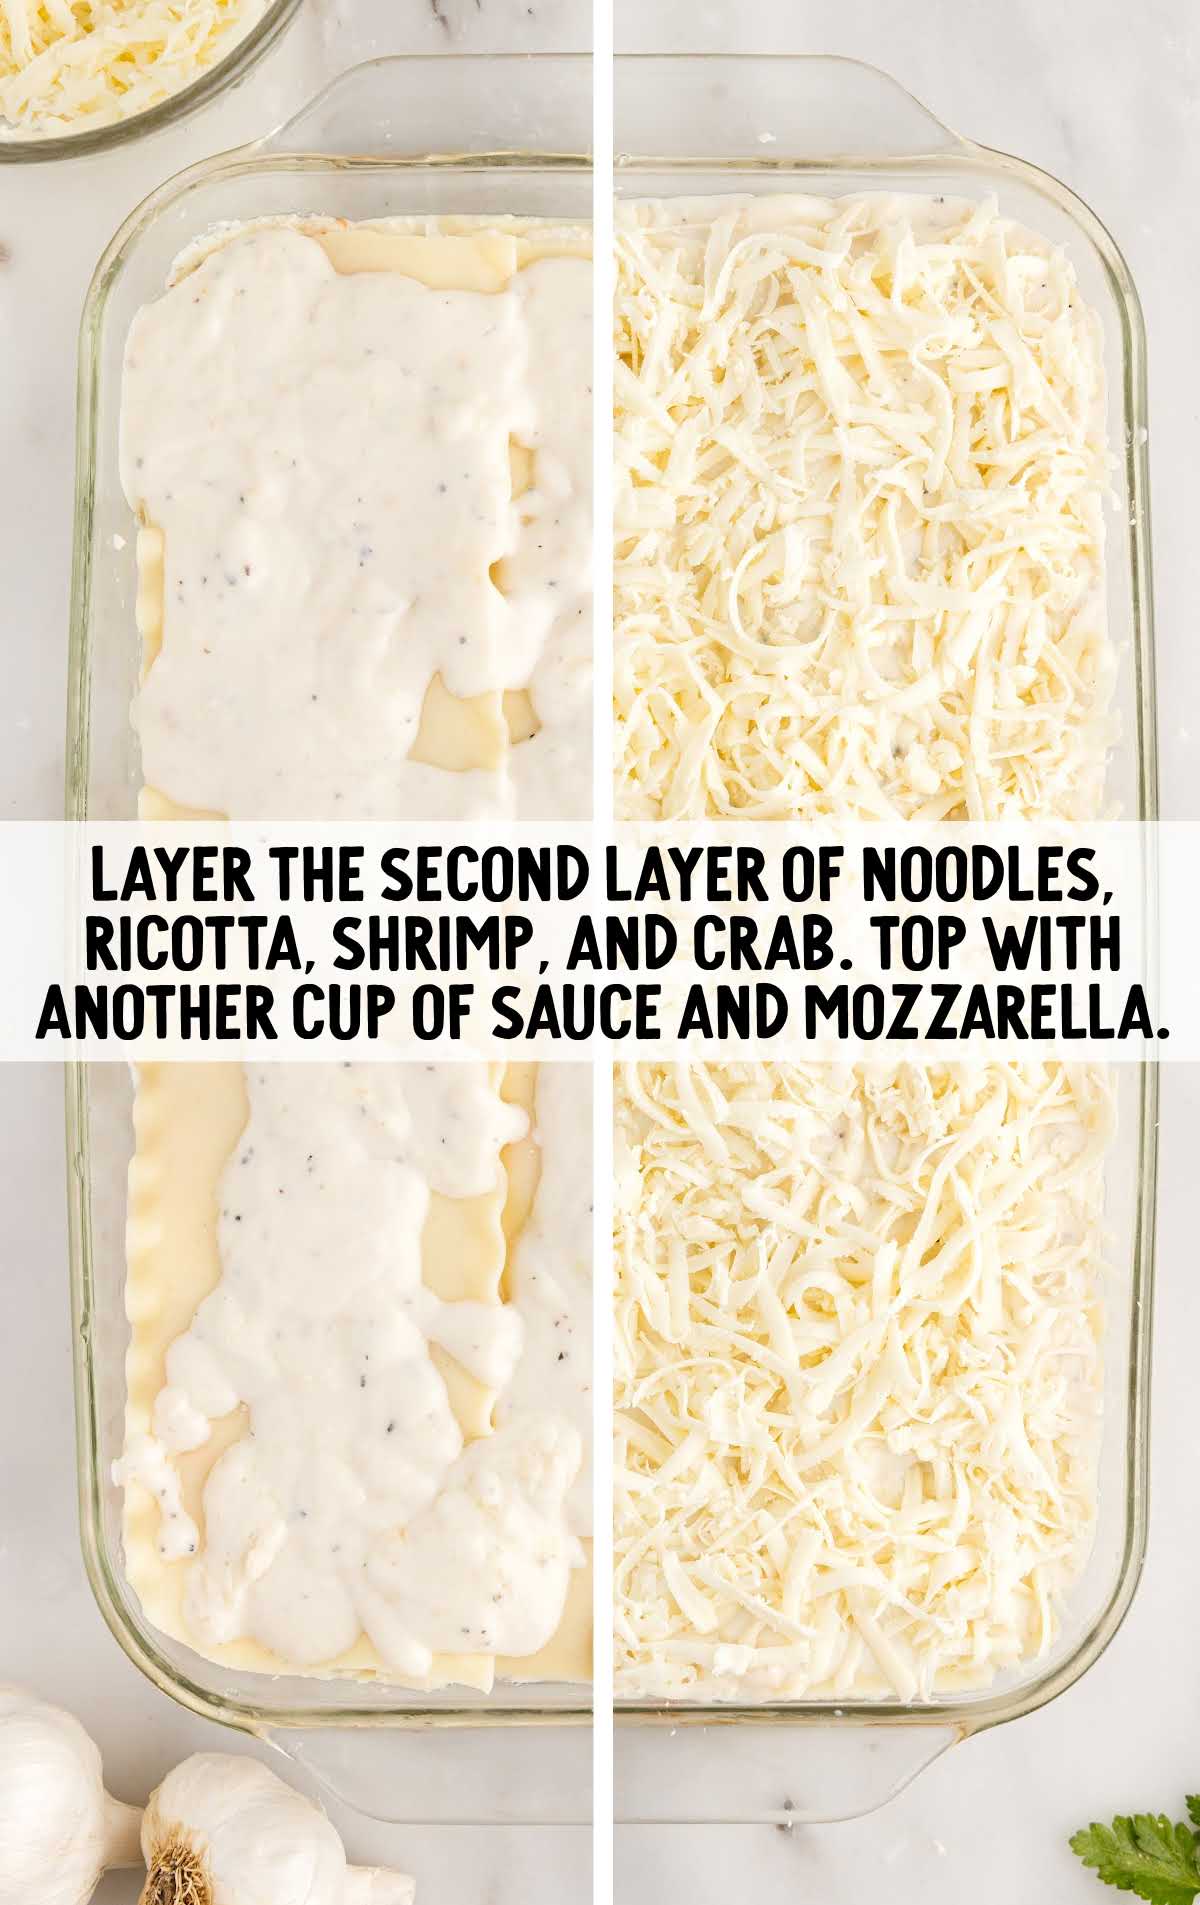 second layer layered with noodles, ricotta, shrimp, and crab. Also, top with sauce and mozzarella